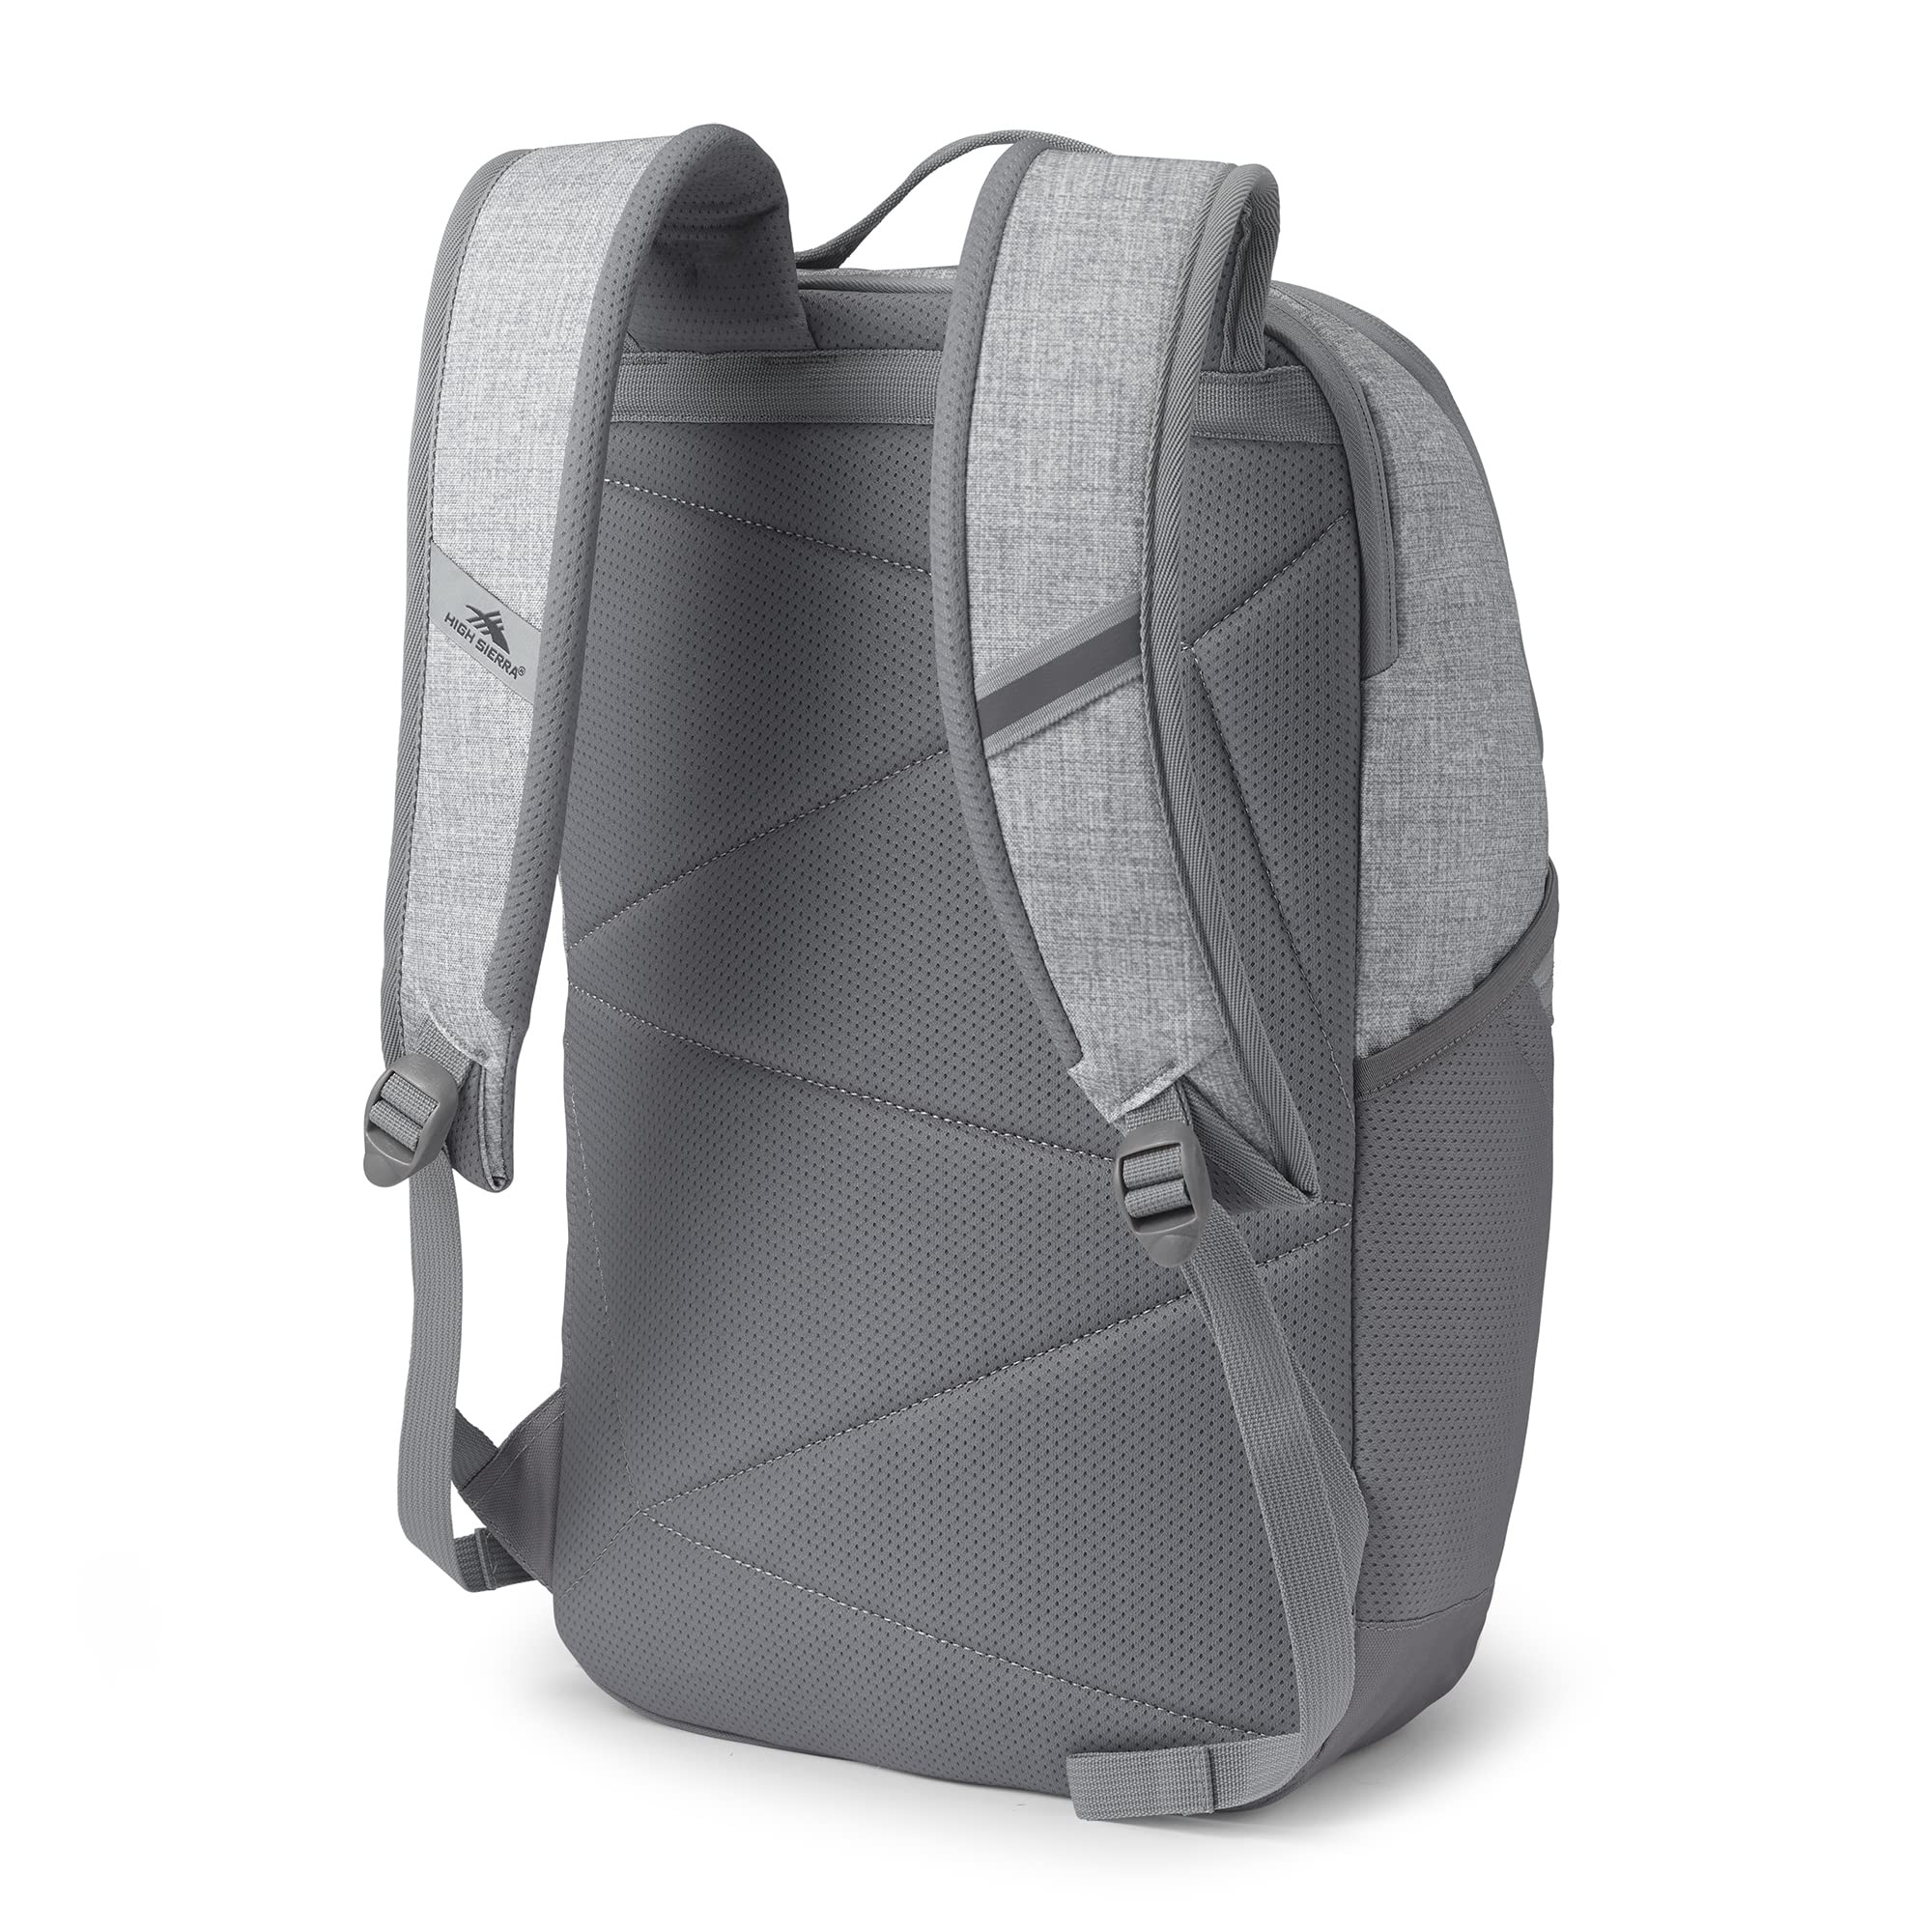 High Sierra Swoop SG Backpack, Travel or Work Laptop Bookbag with Drop Protection Pocket, and Tablet Sleeve, One Size, Silver Heather